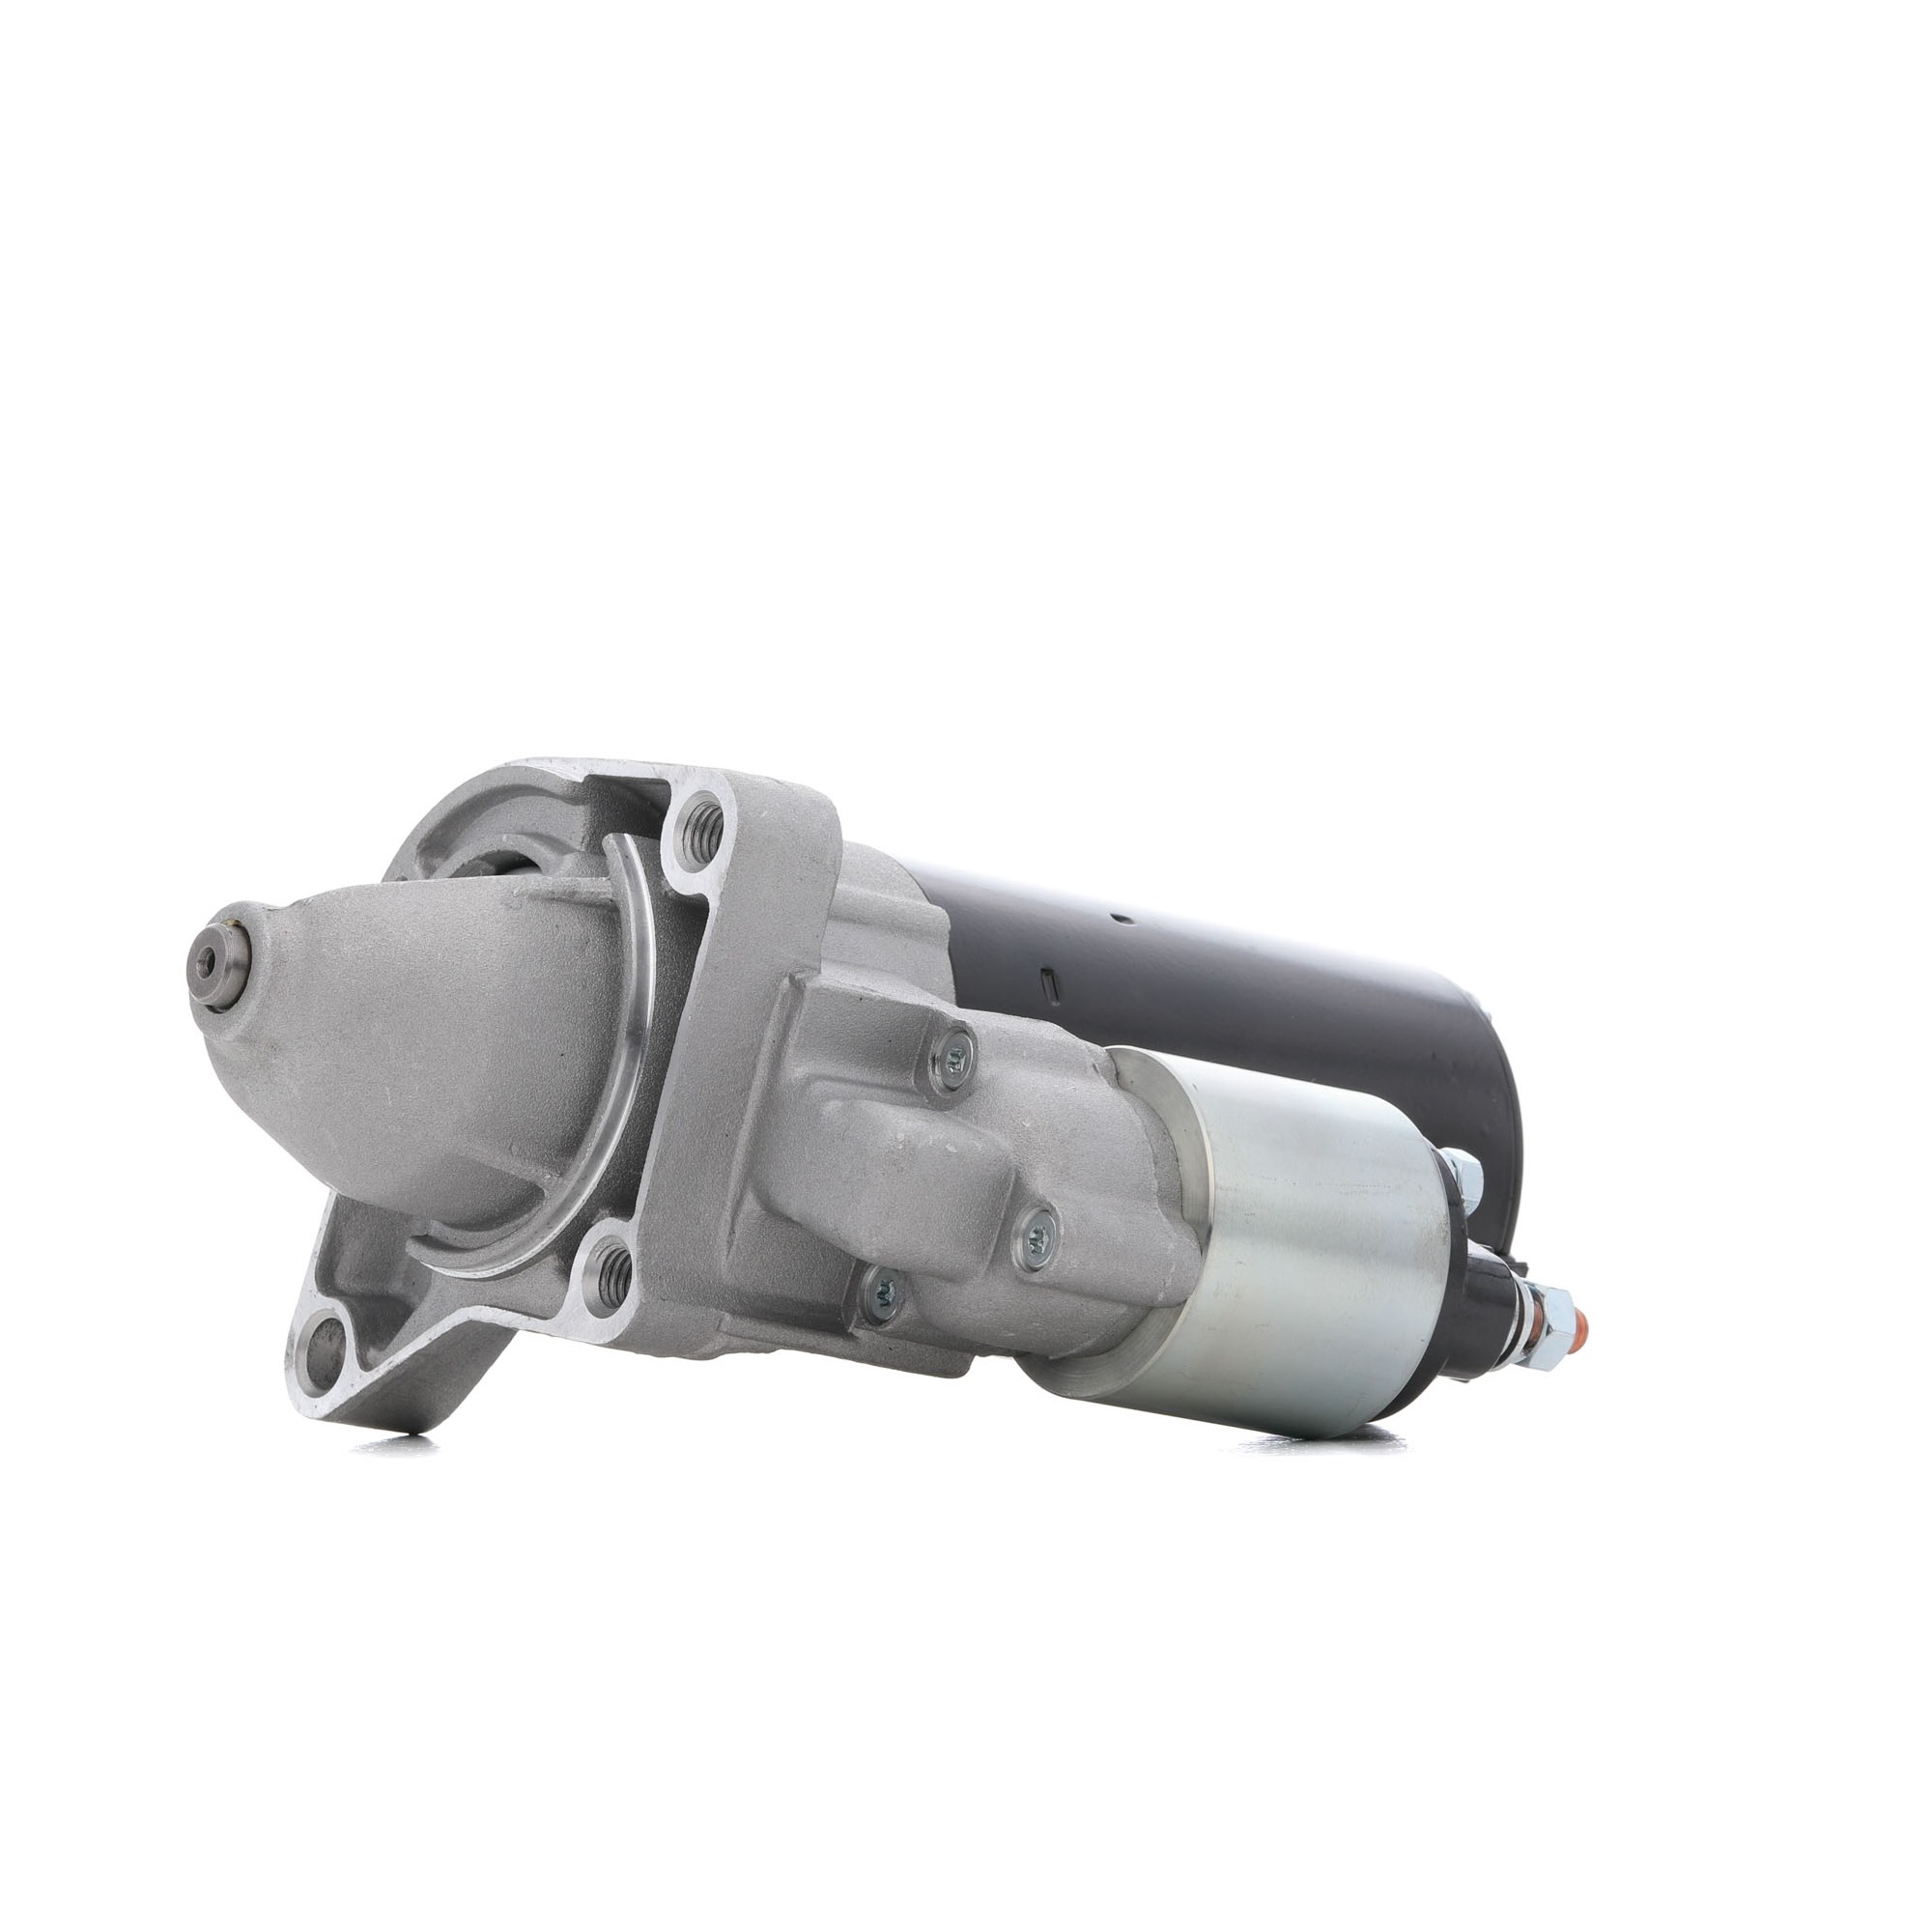 RIDEX 12V, 1,4kW, Number of Teeth: 10, with 50(Jet) clamp, M8 B+, re 30, Ø 76 mm Starter 2S0212 buy